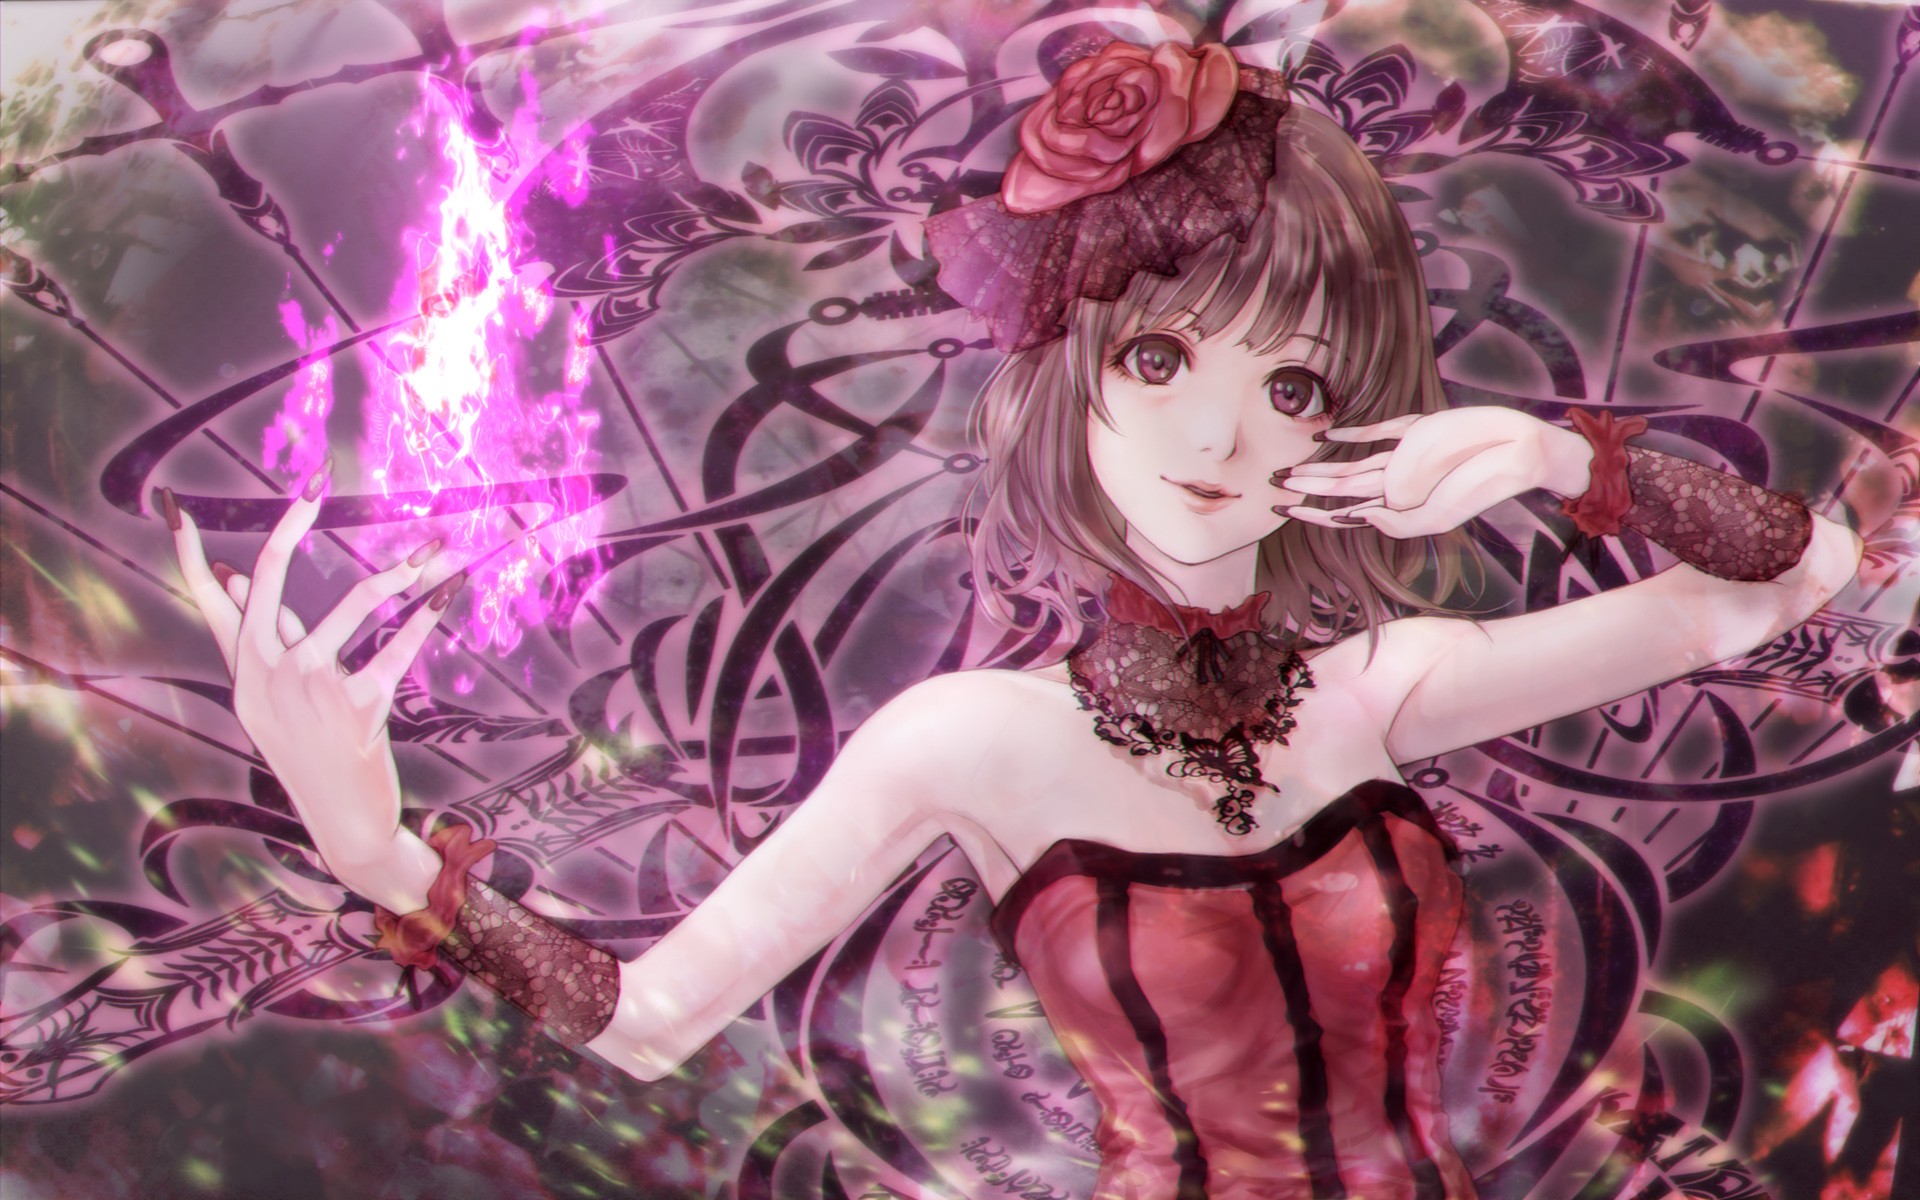 Anime 1920x1200 anime anime girls Pixiv long hair painted nails flower in hair red clothing fantasy art fantasy girl brunette looking at viewer women